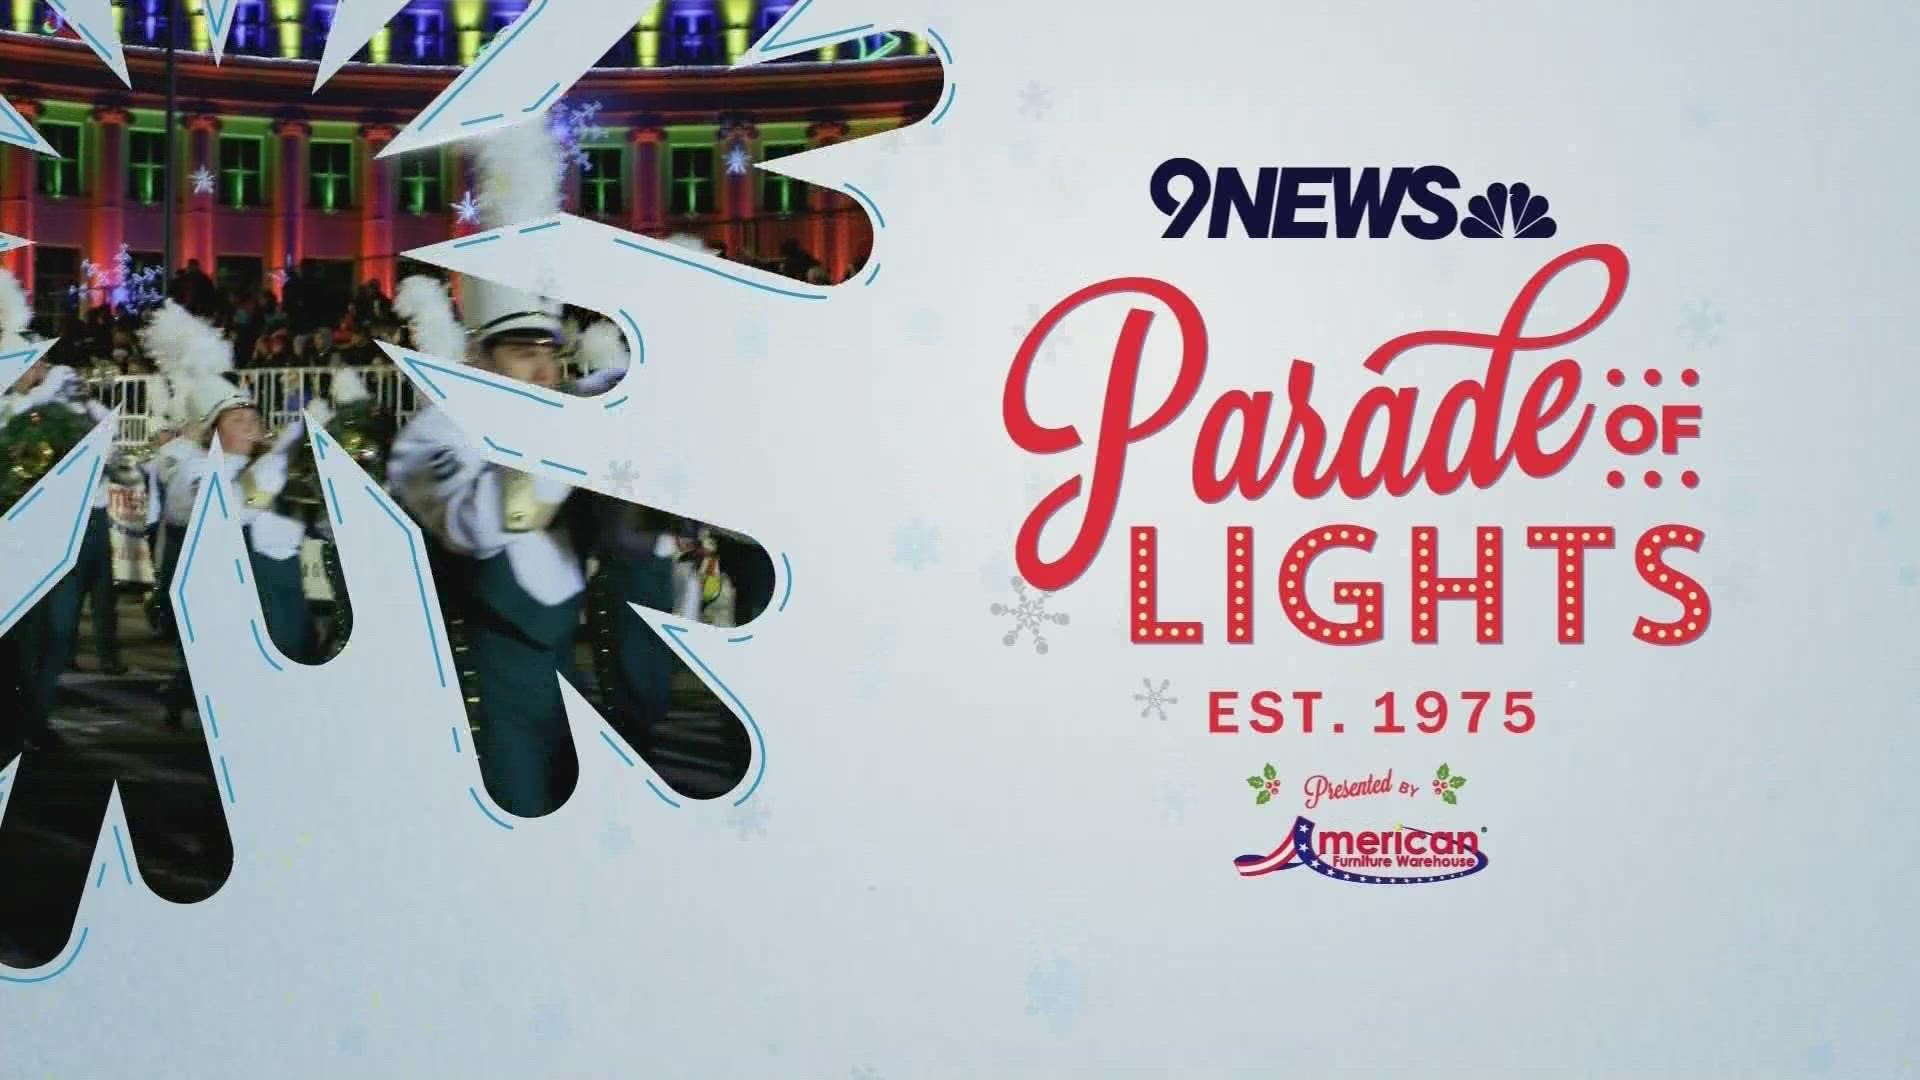 47th annual 9NEWS Parade of Lights 2022 in Denver.